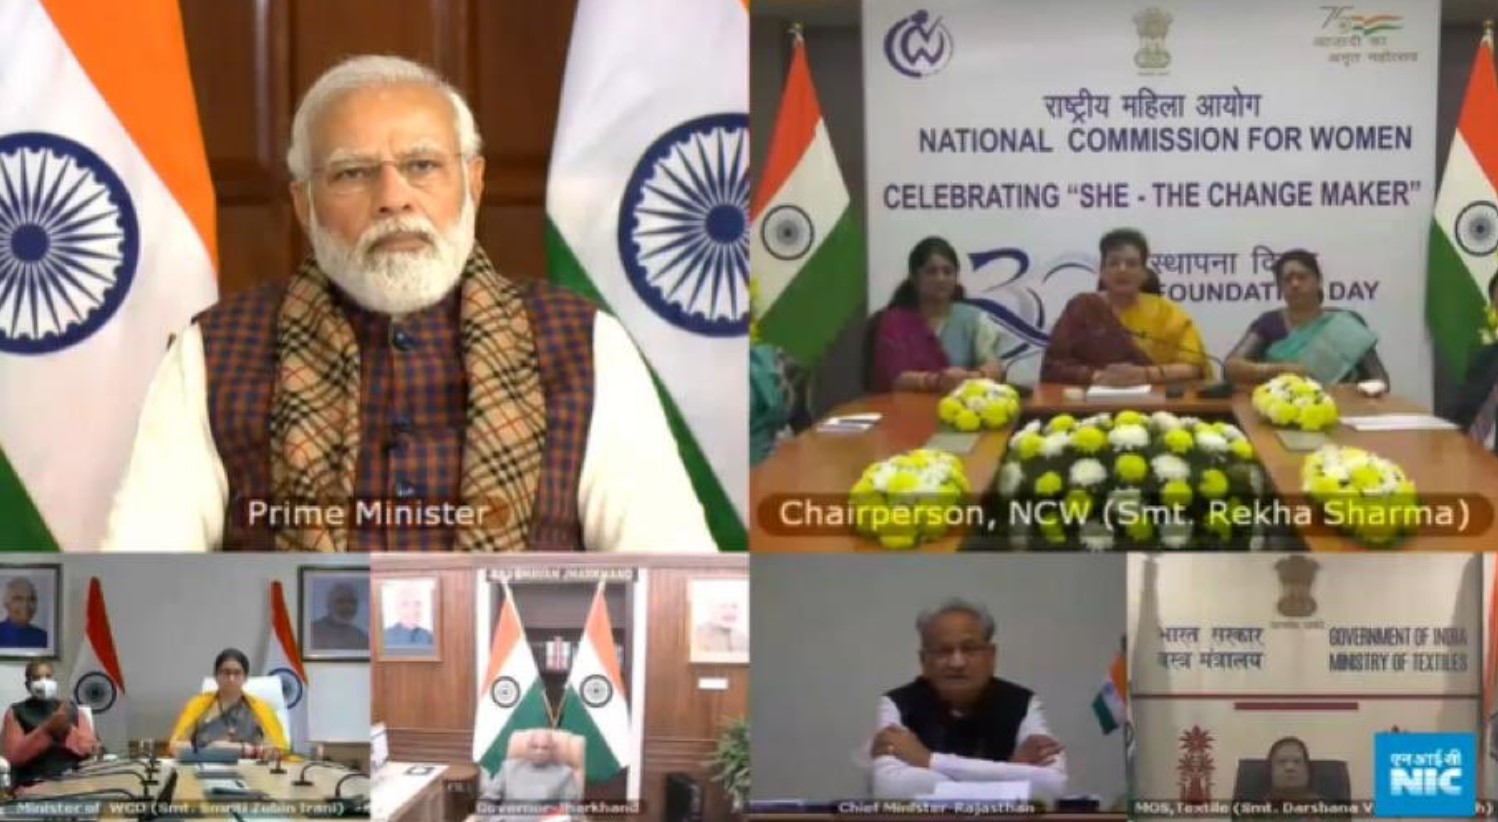 PM Modi addresses 30th National Commission for Women Foundation Day programme